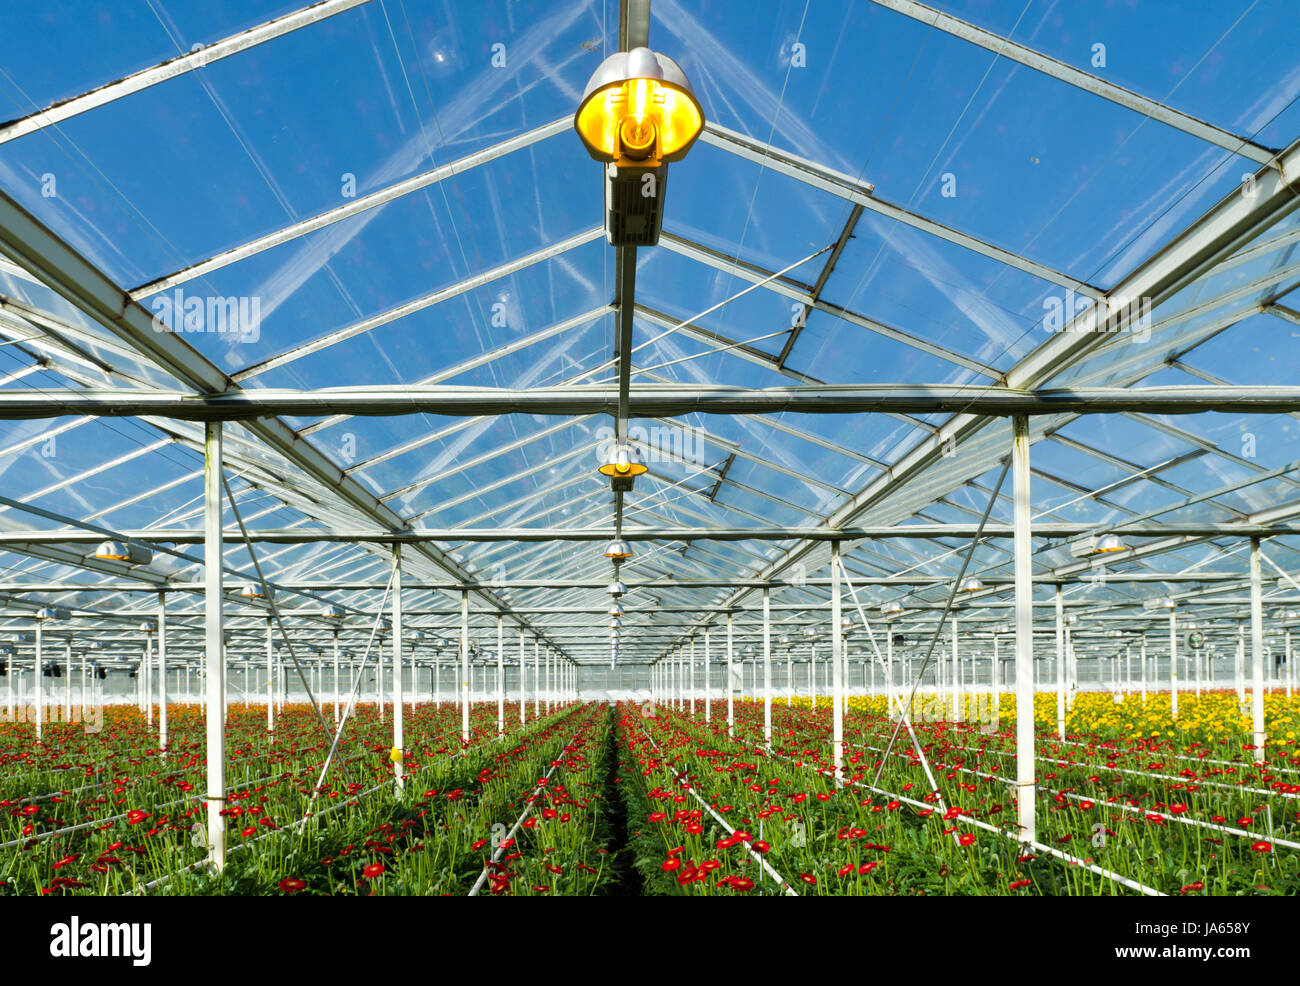 interior, flower, flowers, plant, netherlands, horticulture, cultivation, Stock Photo